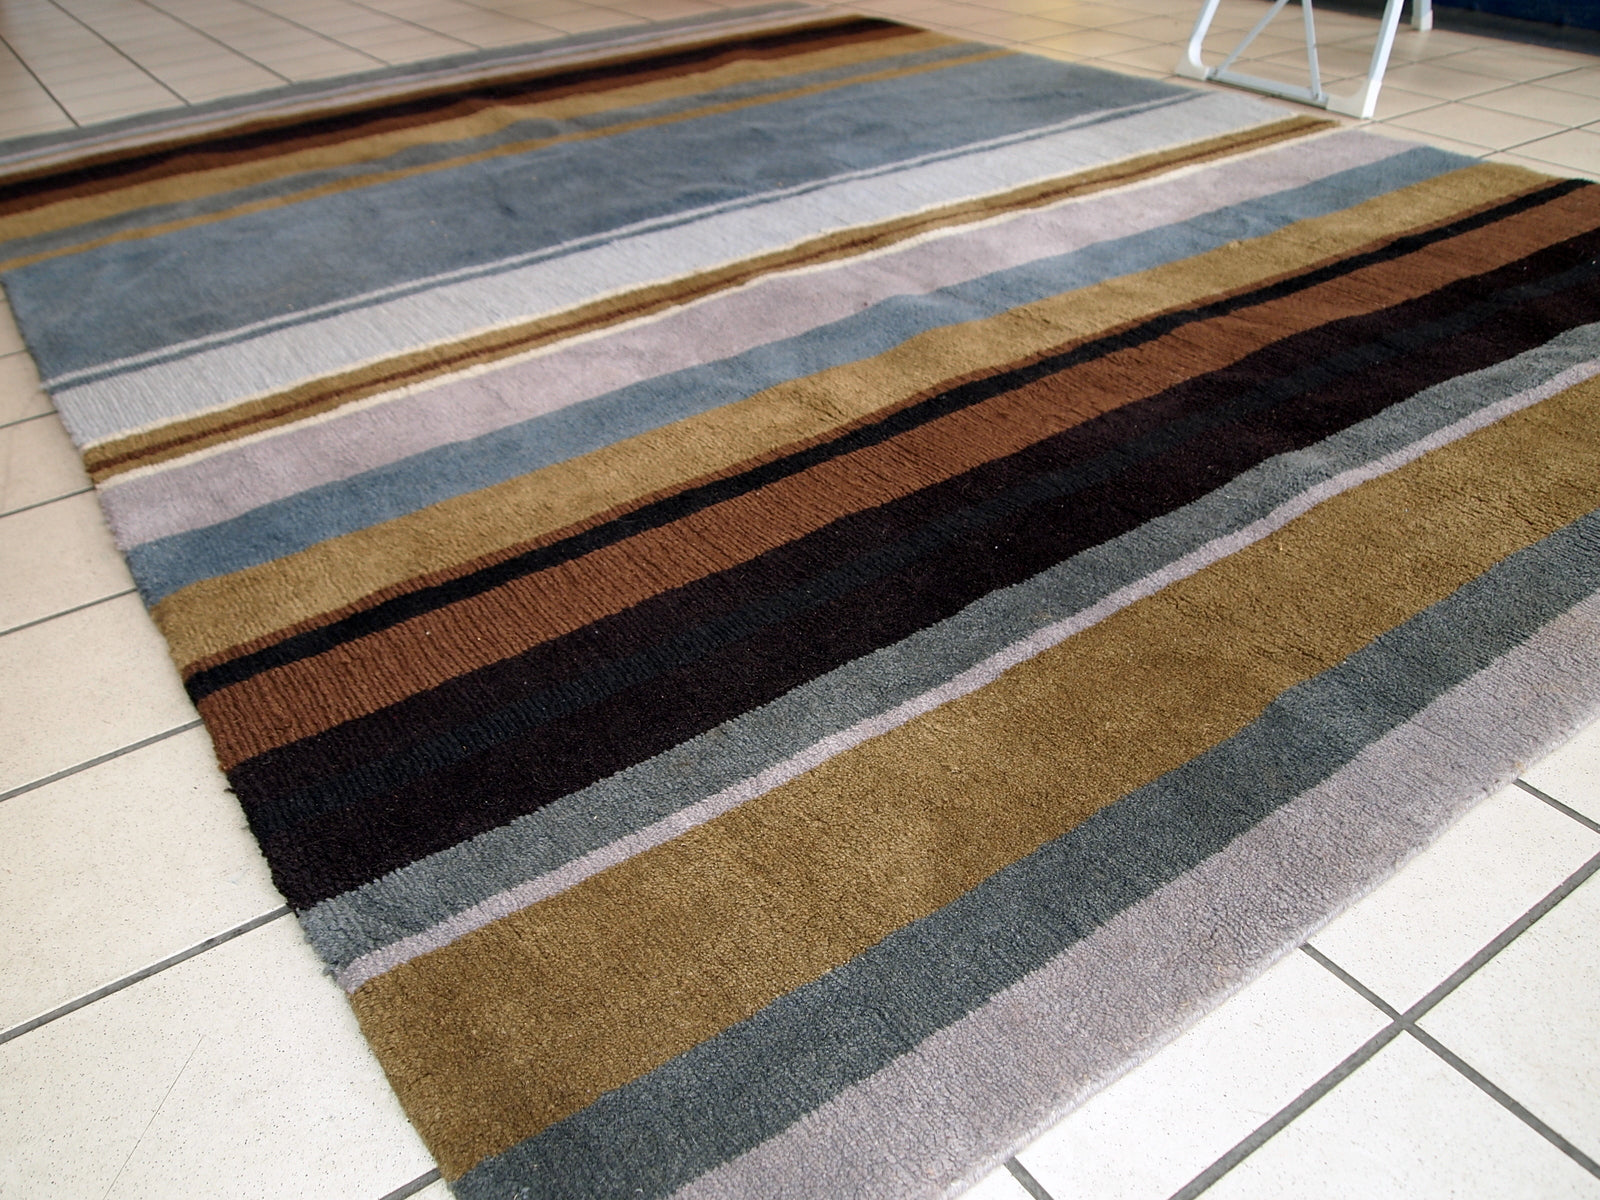 Vintage handmade Indian striped rug in blue, purple and different shades of brown. Each line of the rug made in different technics as well, so the pattern on it changes. The rug is very thick, heavy and soft, made out of wool. 